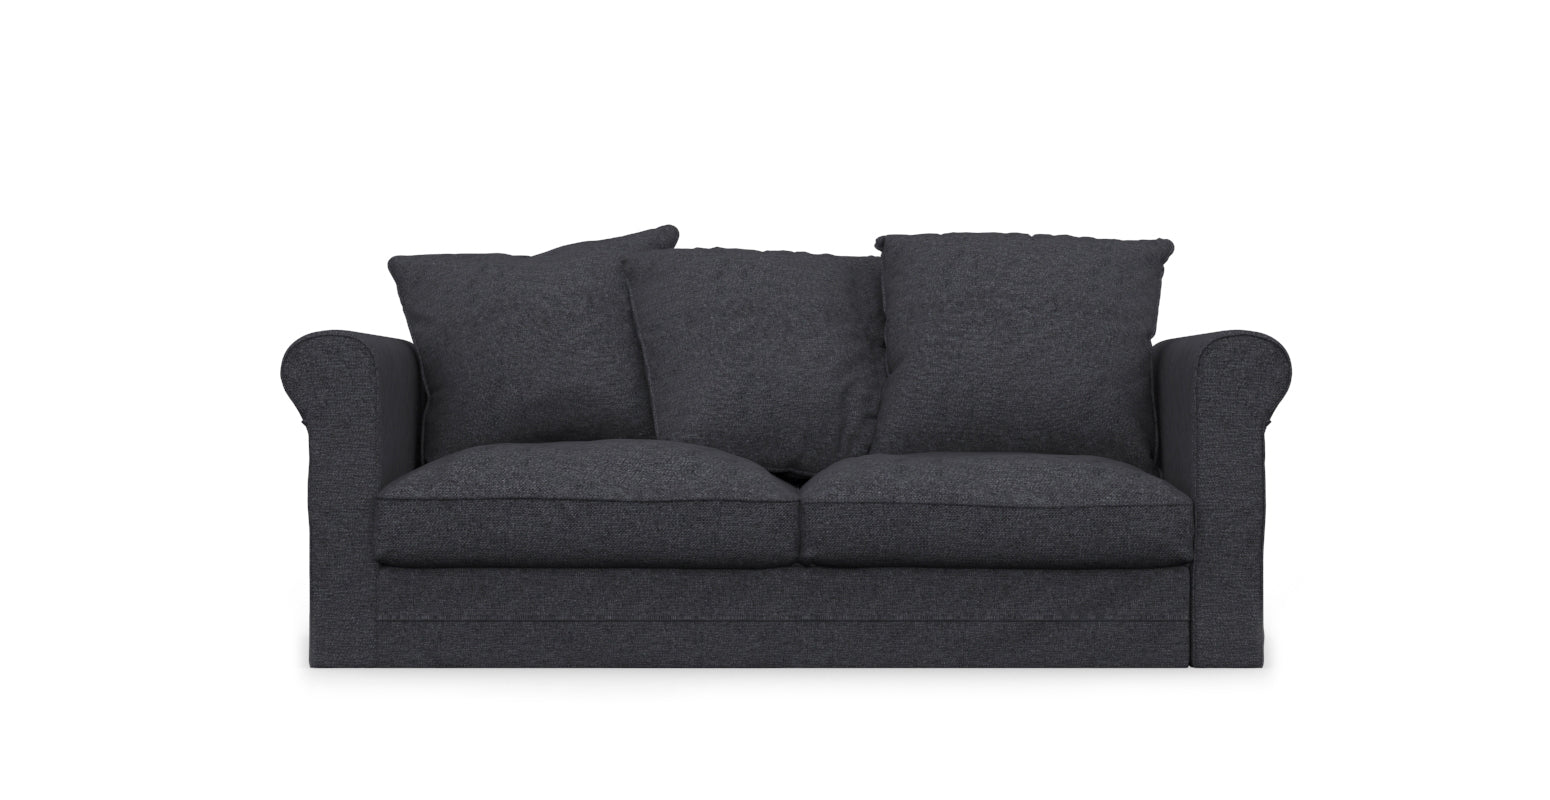 ikea grÖnlid covers – tagged "sofa covers" – comfortly